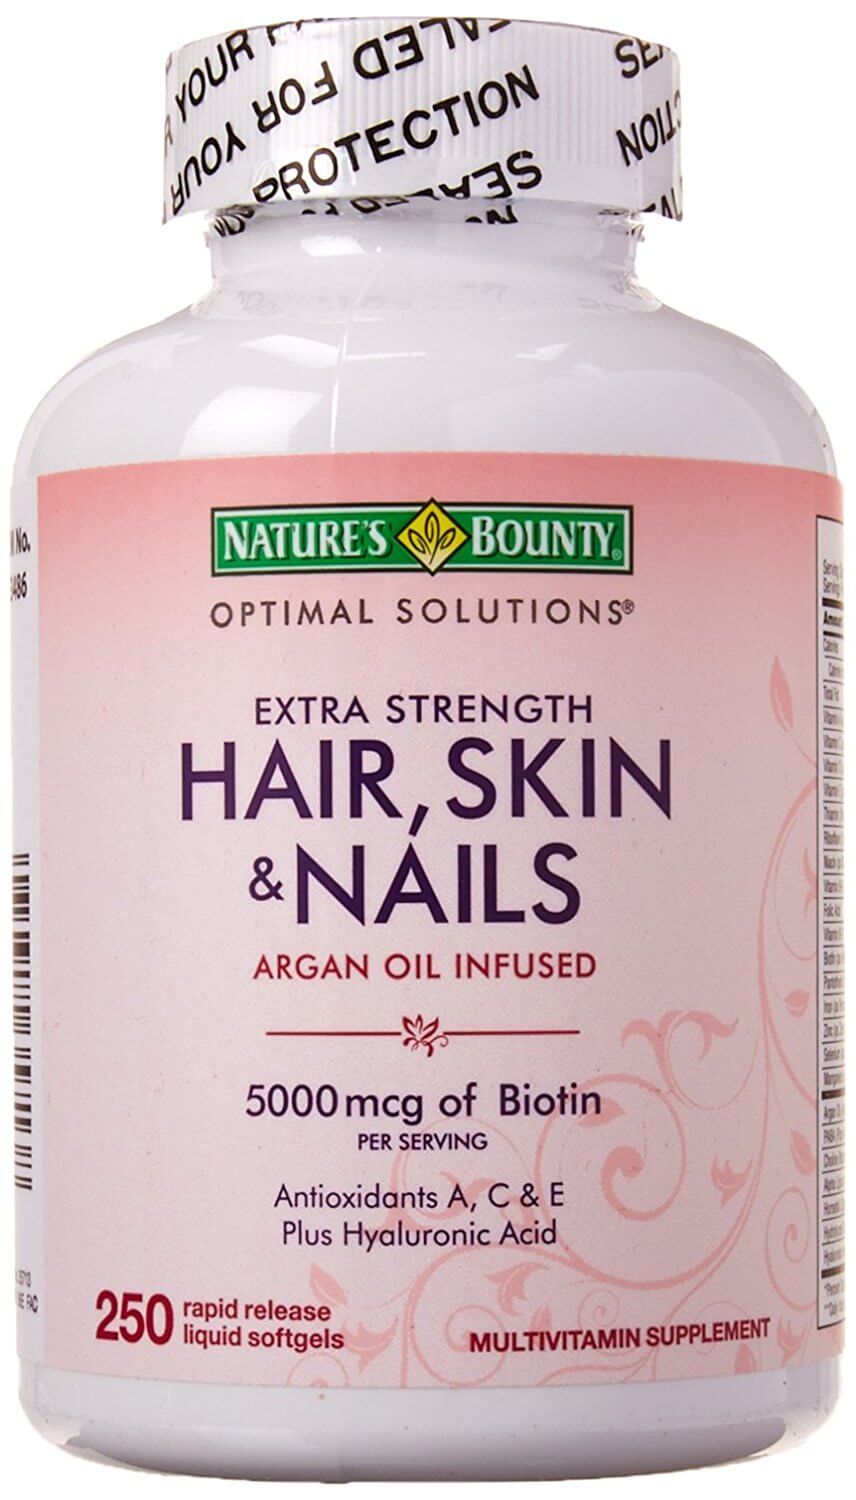 spring valley hair skin and nails extra strength reviews